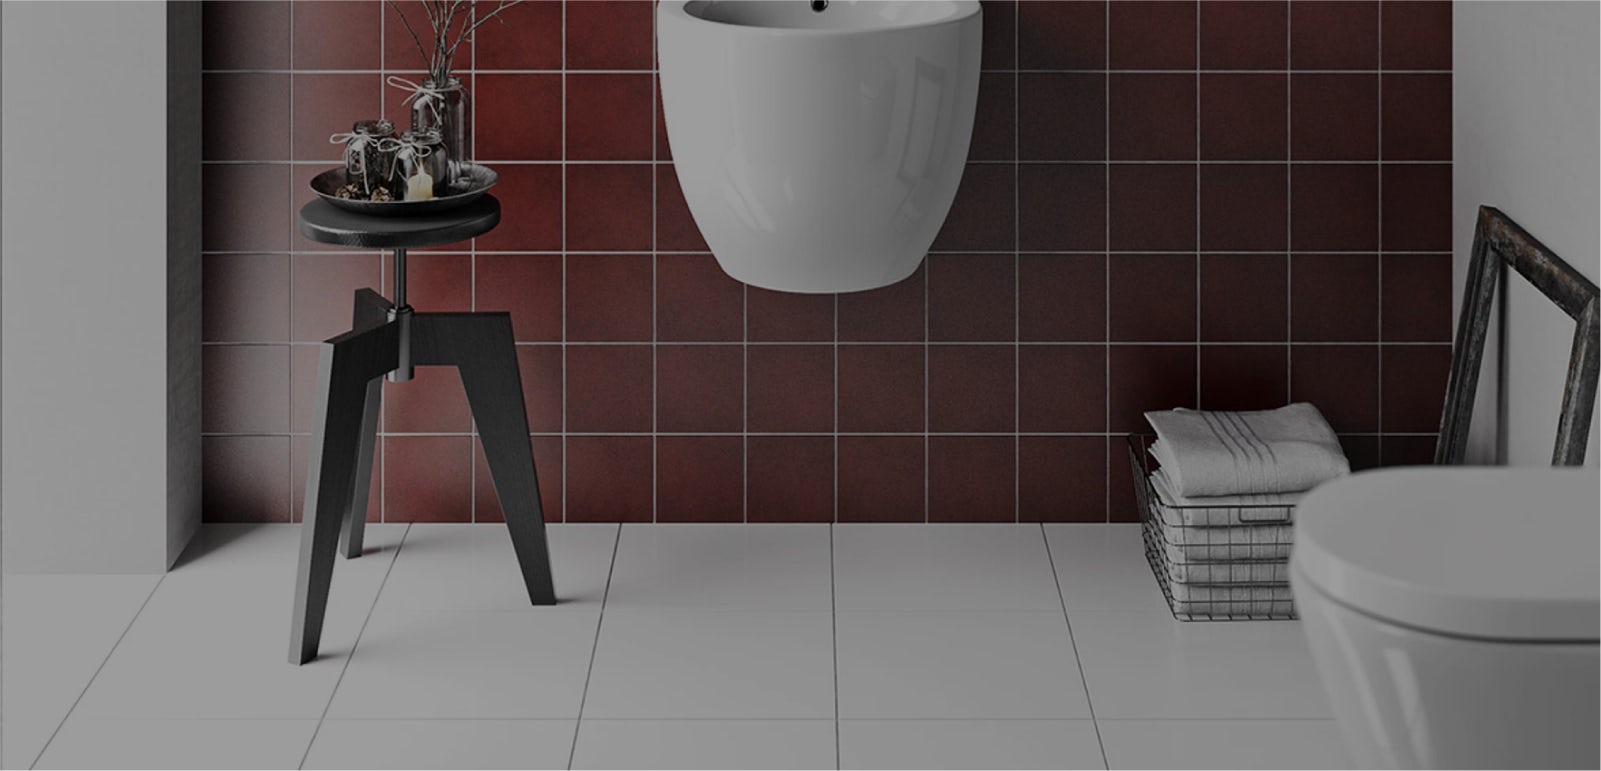 Toilet Before Or After Tiling The Floor, How To Cut Tiles Fit Around Pipes